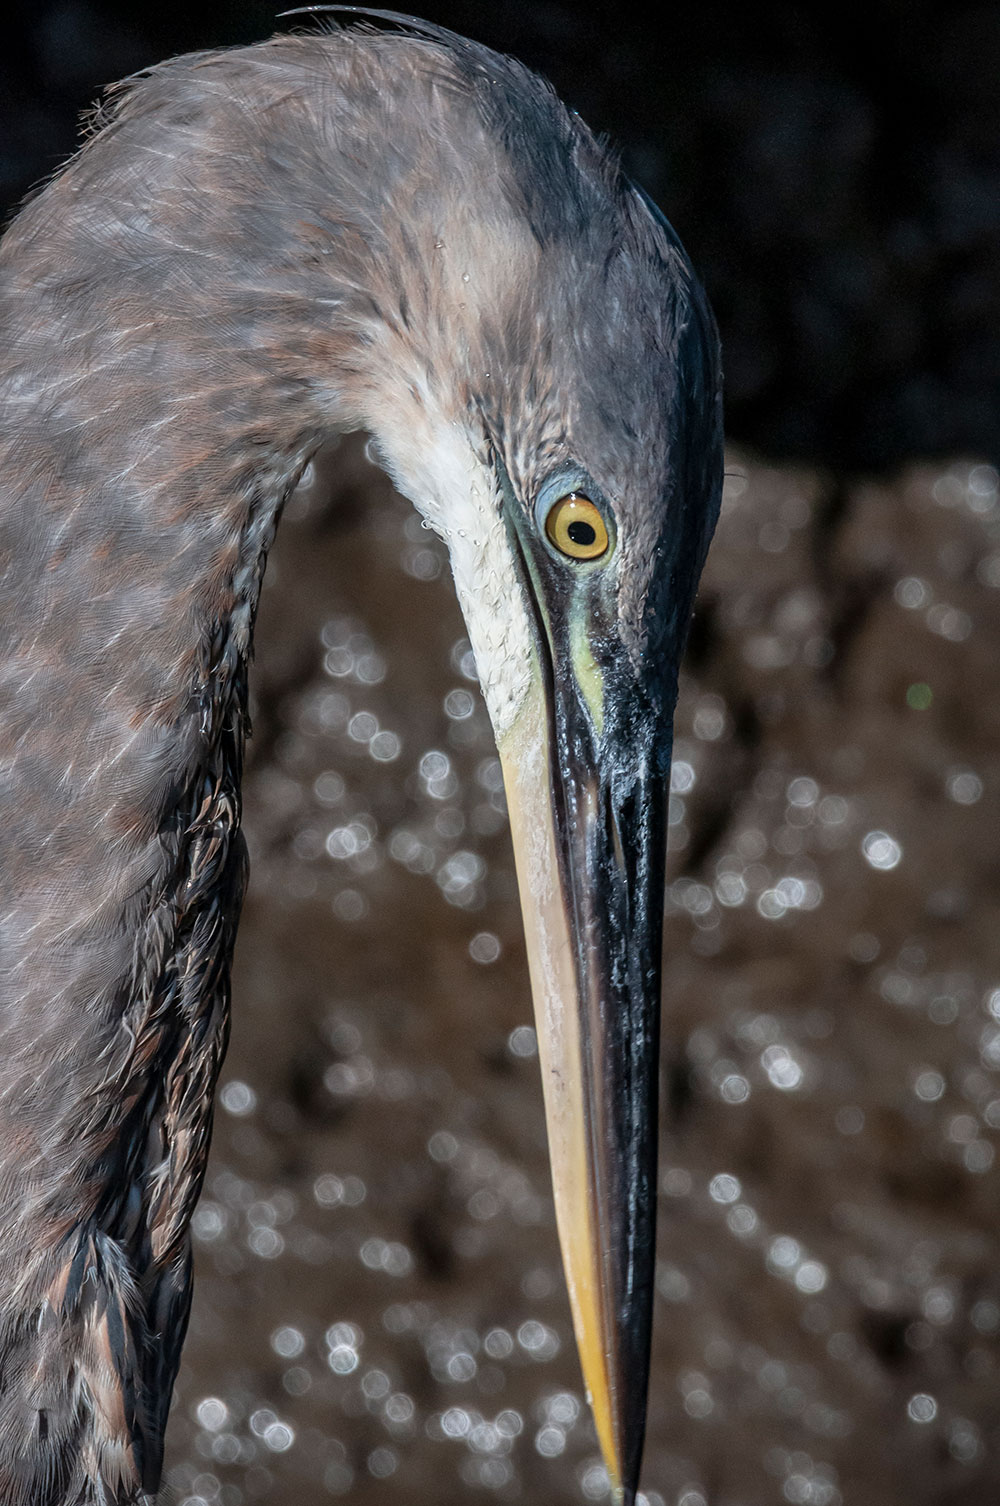 Great Blue Heron by Ted Anderson